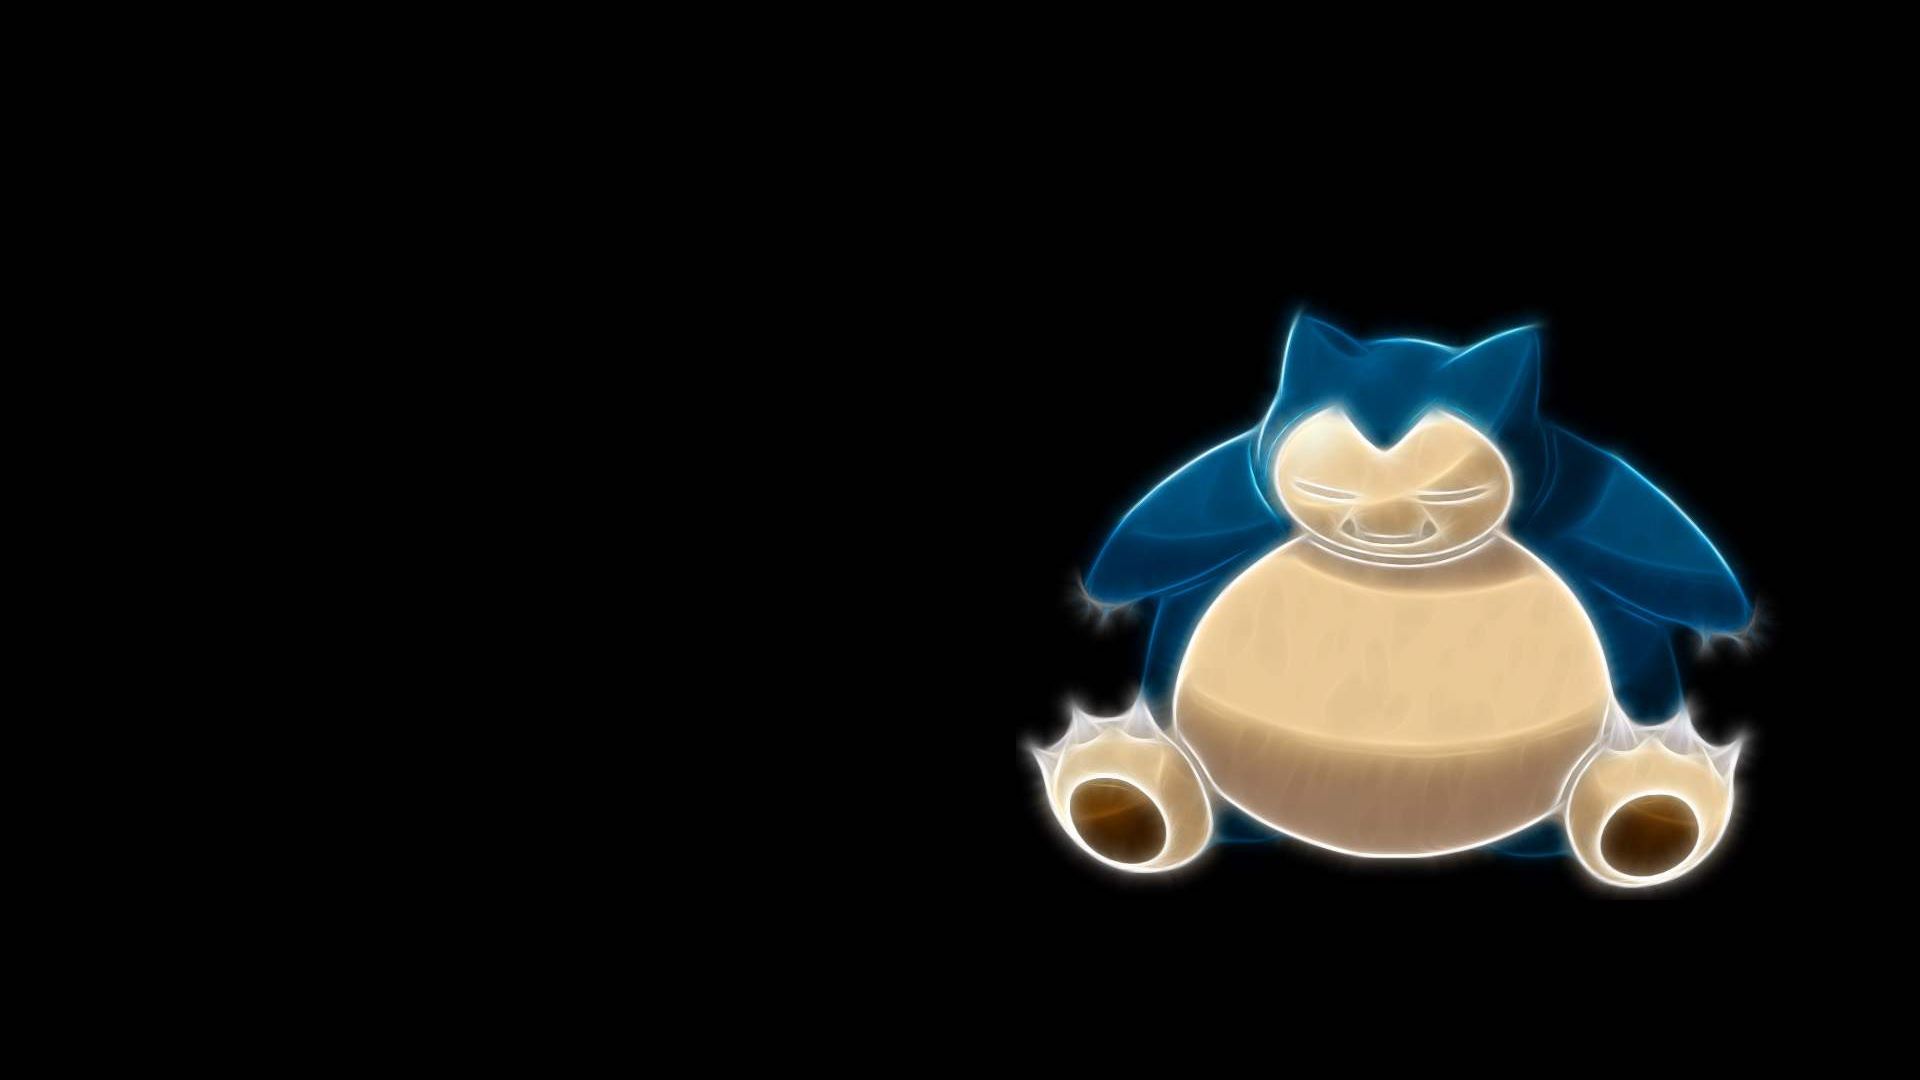 Free download Download the Pokemon anime wallpaper titled Snorlax [1920x1200] for your Desktop, Mobile & Tablet. Explore Epic Pokemon Wallpaper. Awesome Pokemon Wallpaper, Cool Pokemon Wallpaper HD, Wallpaper for Computer Pokemon